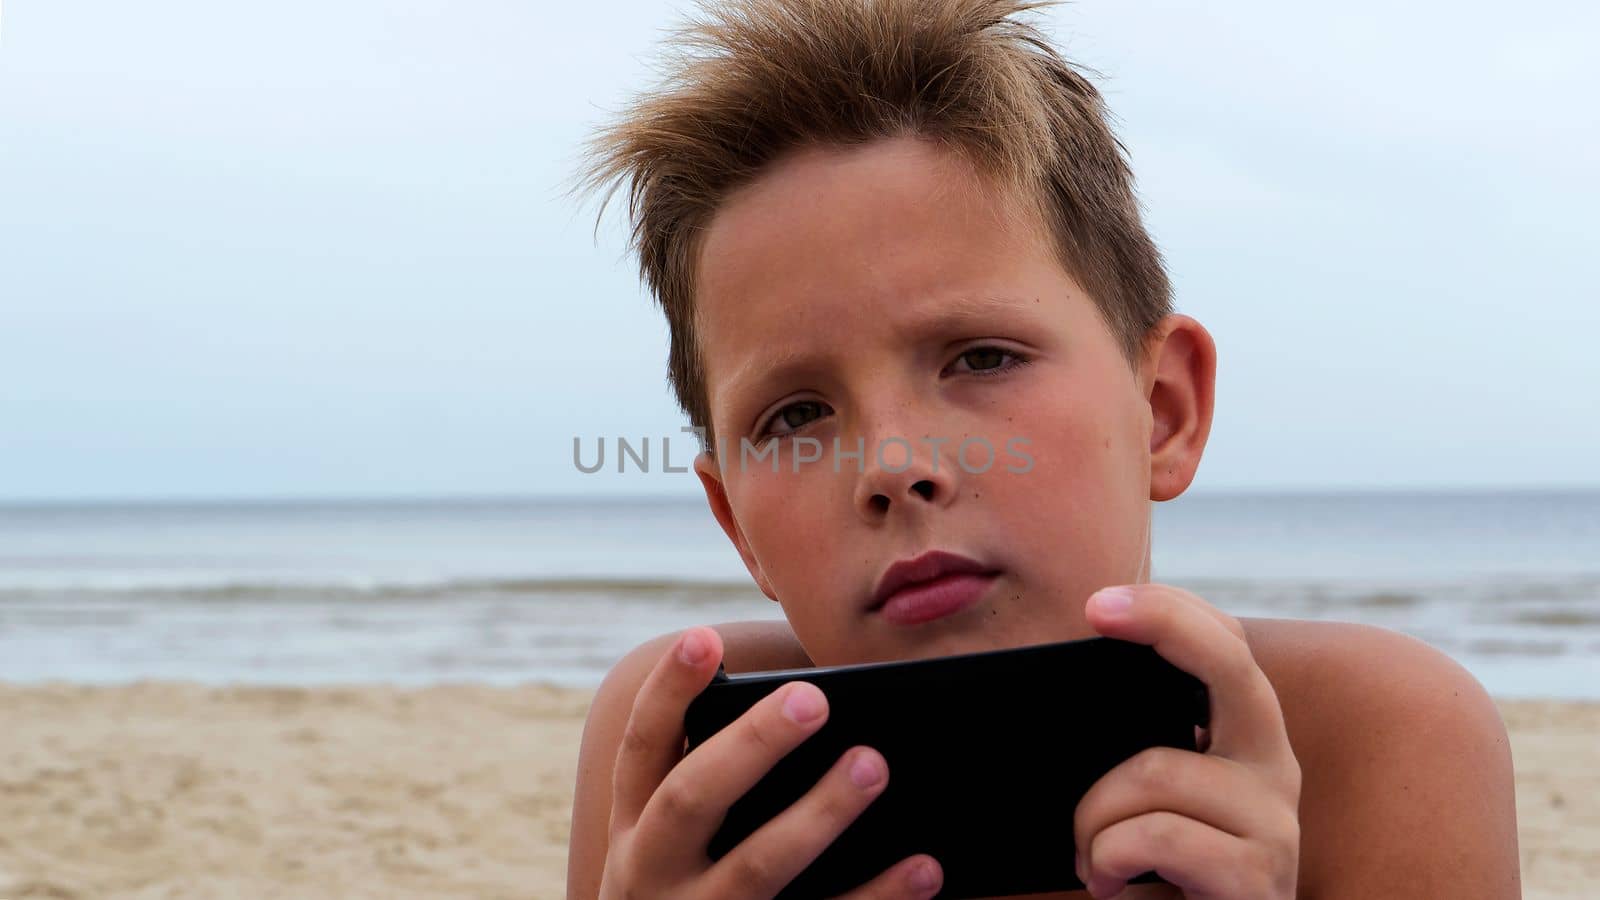 A handsome boy 10-13 years old with a gadget in his hands looks into the camera against the background of the sea shore. The boy is reading an e-book on the sea beach.